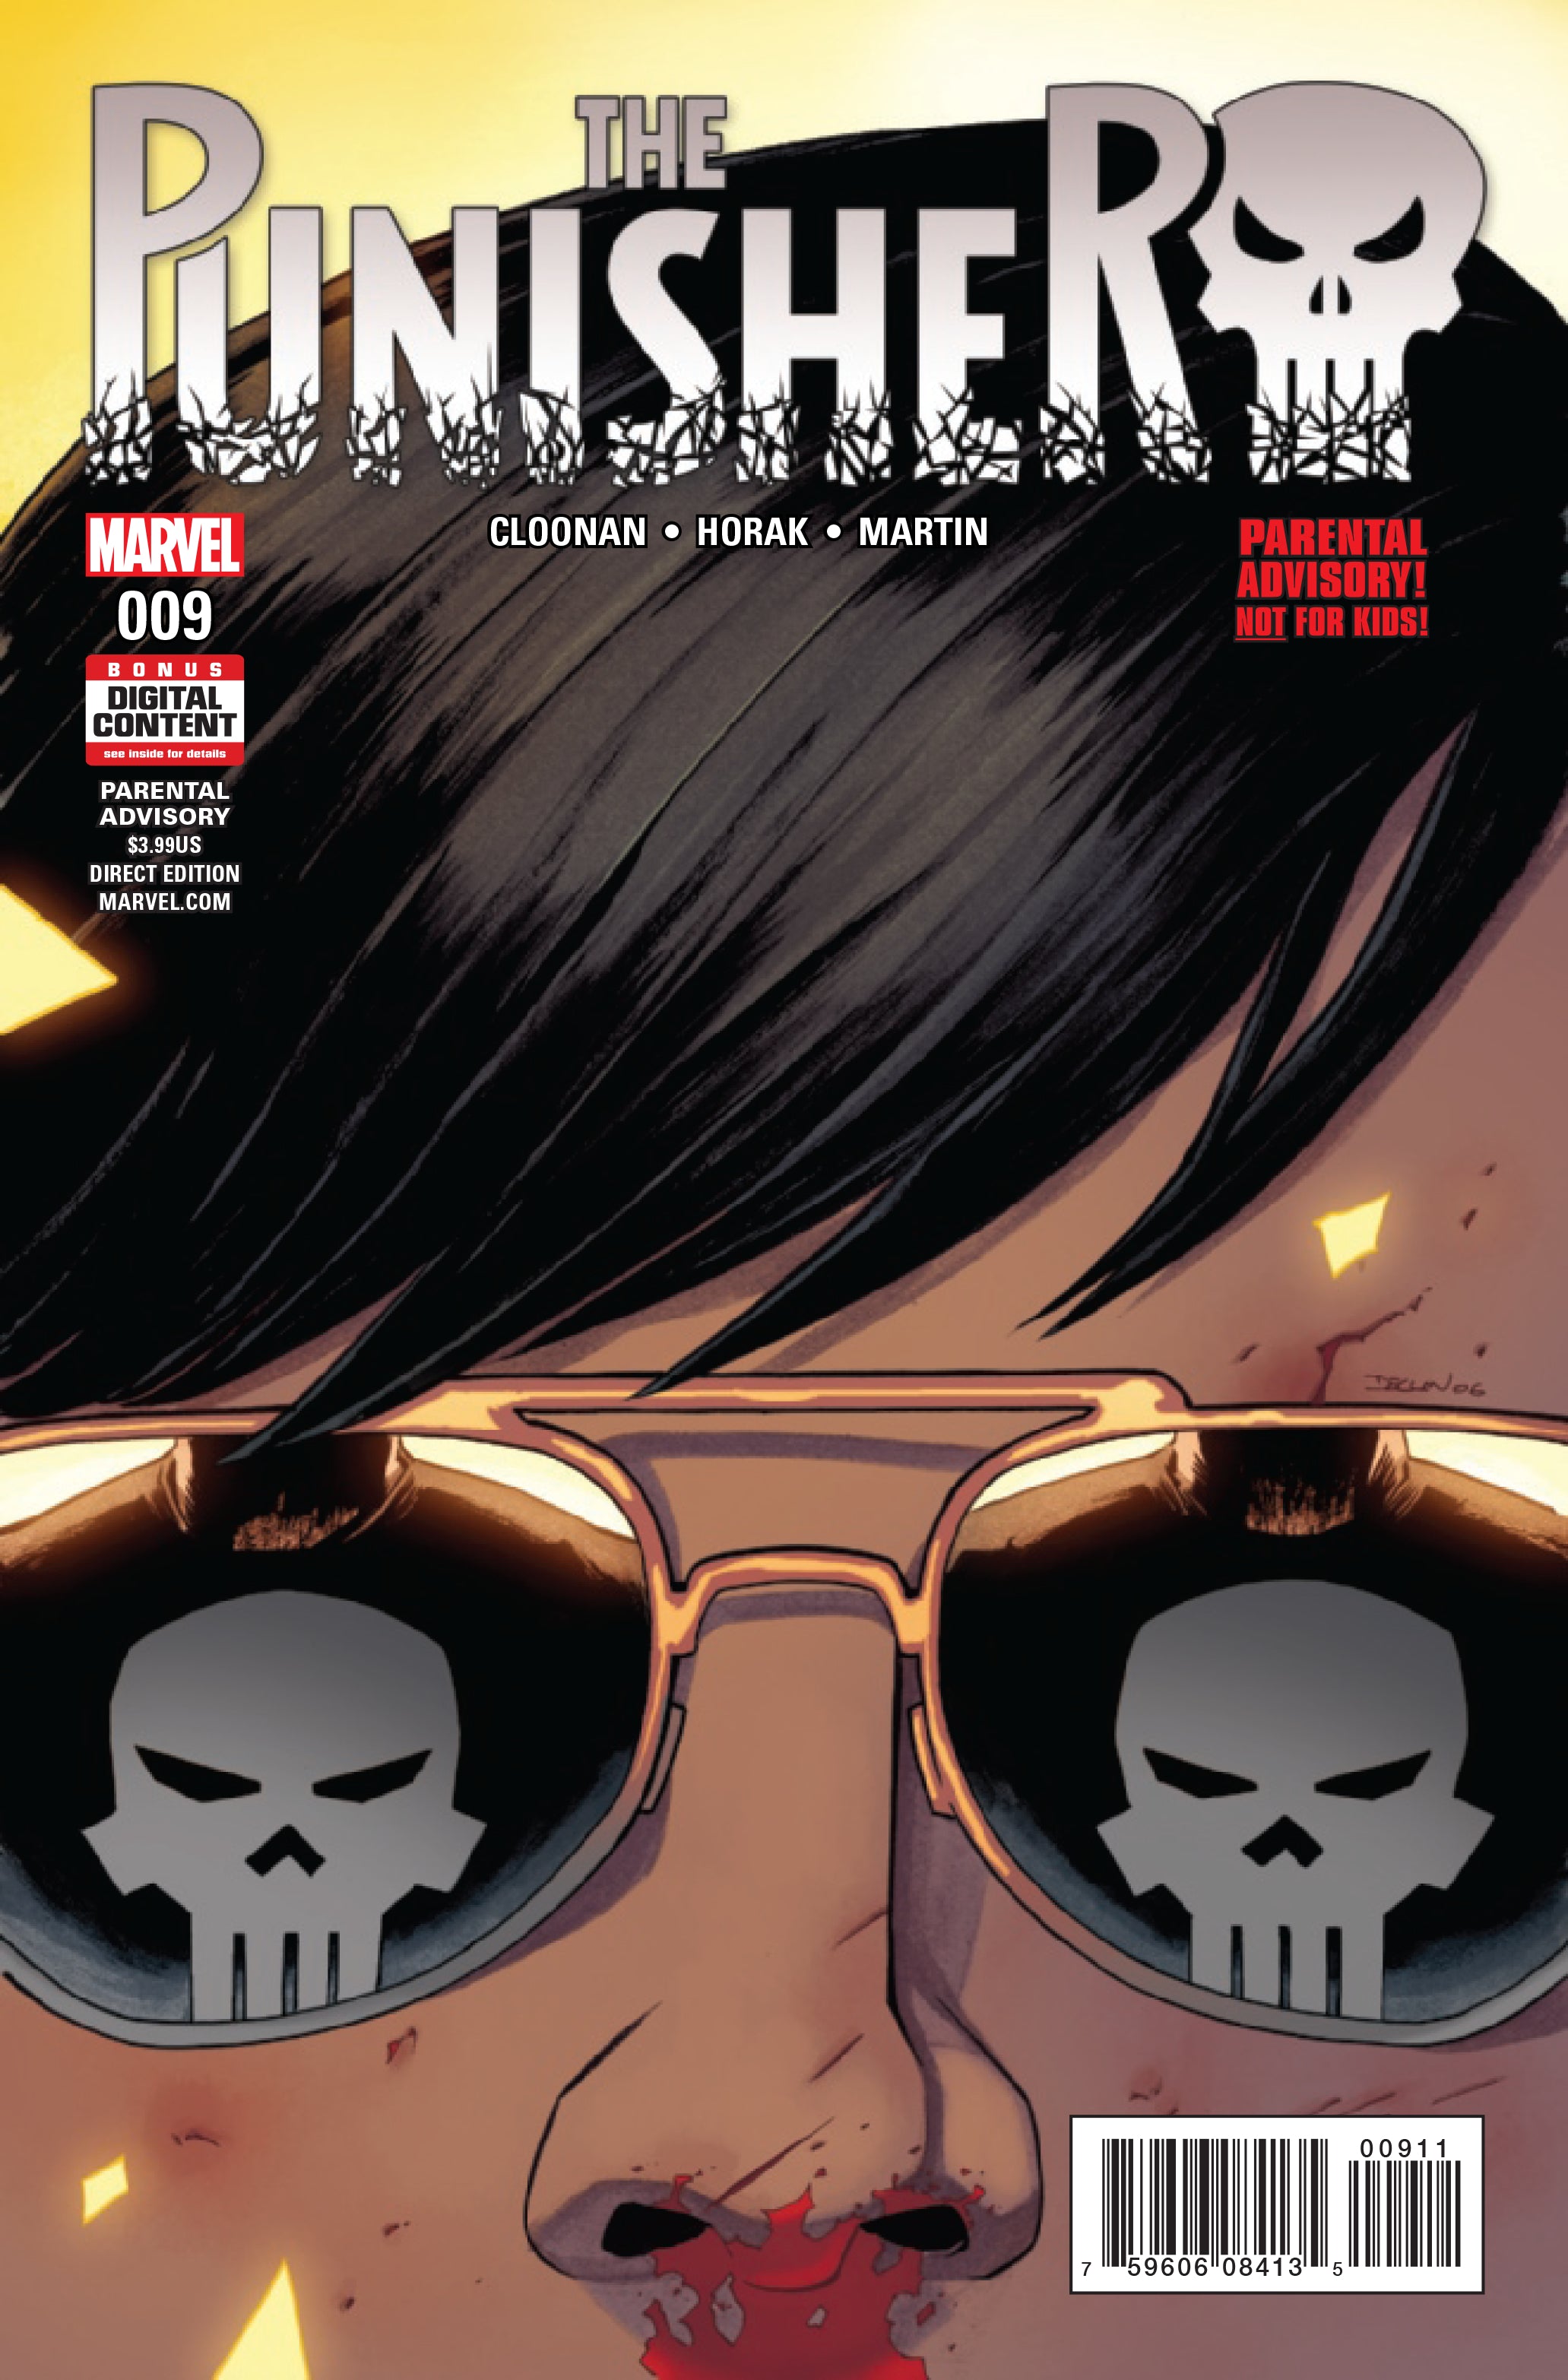 PUNISHER #9 | Game Master's Emporium (The New GME)